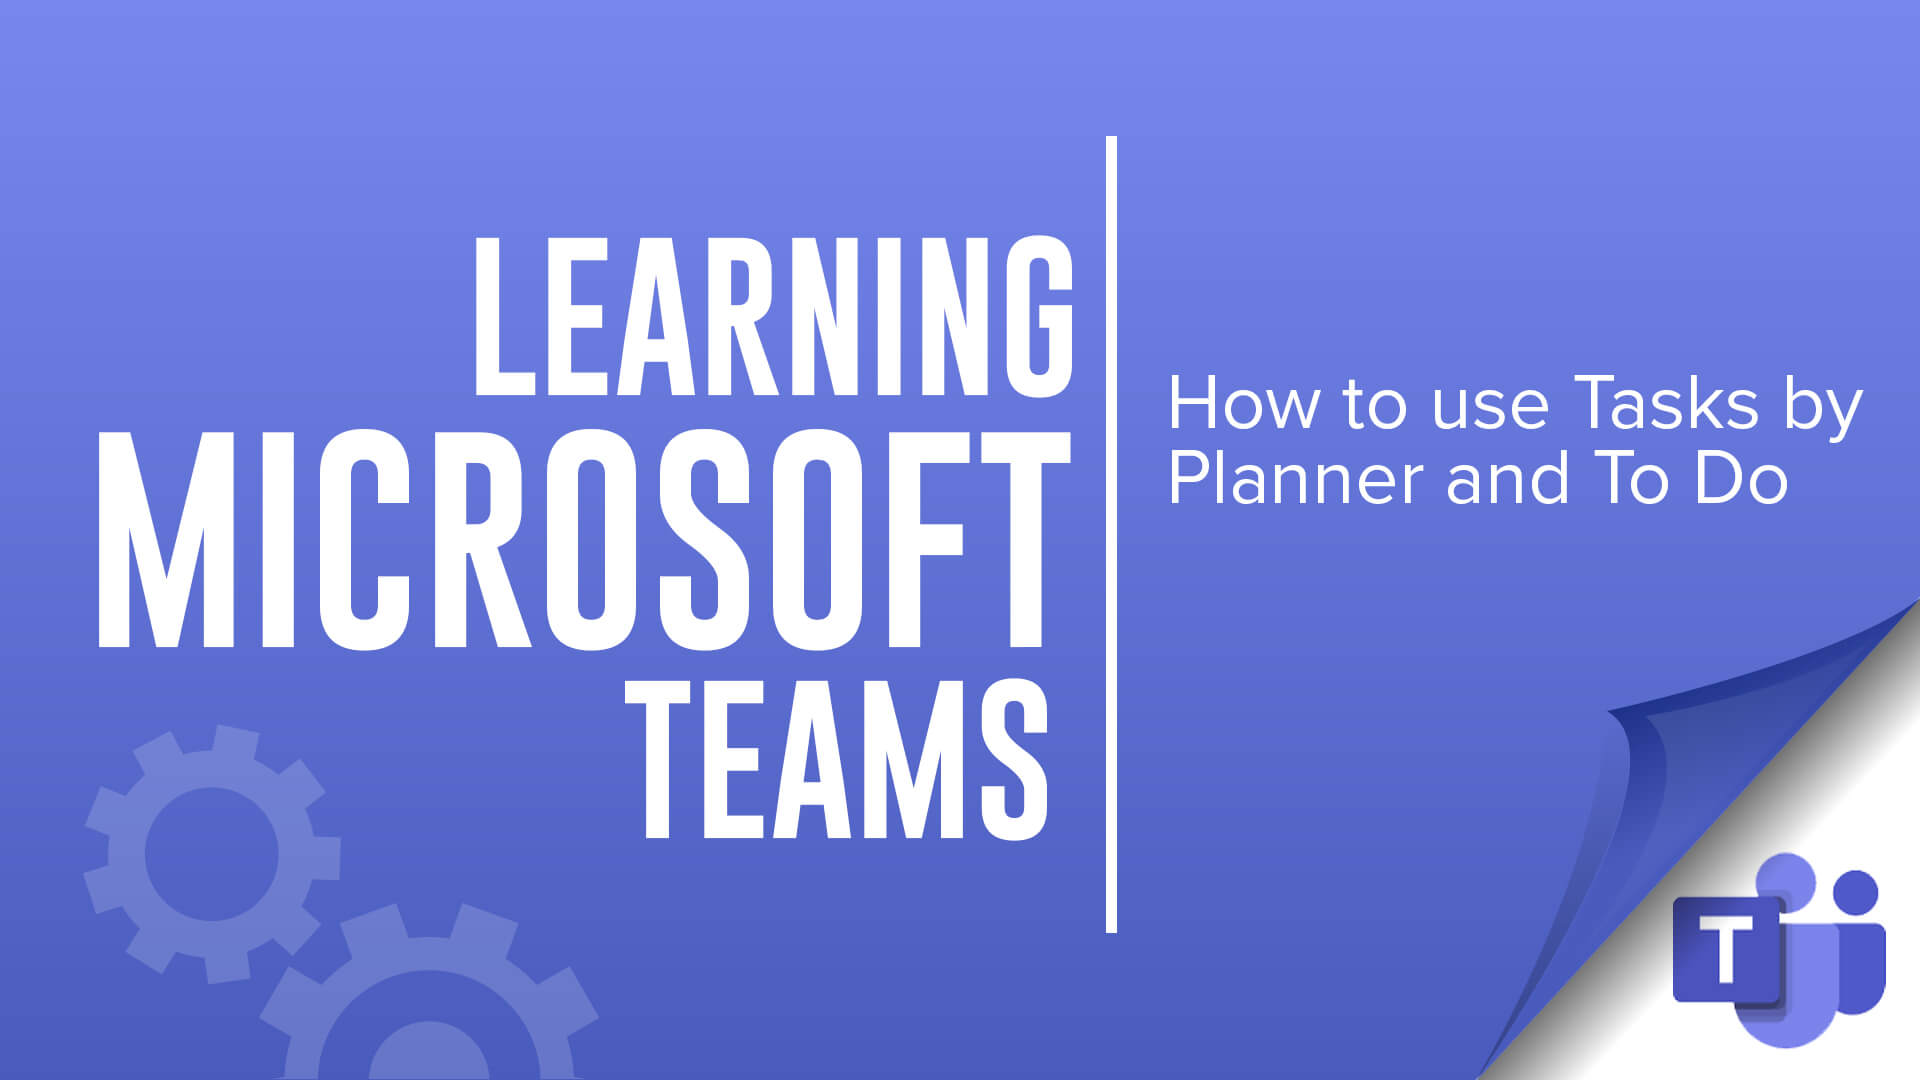 learning Microsoft Teams - Using Tasks by Planner and To Do